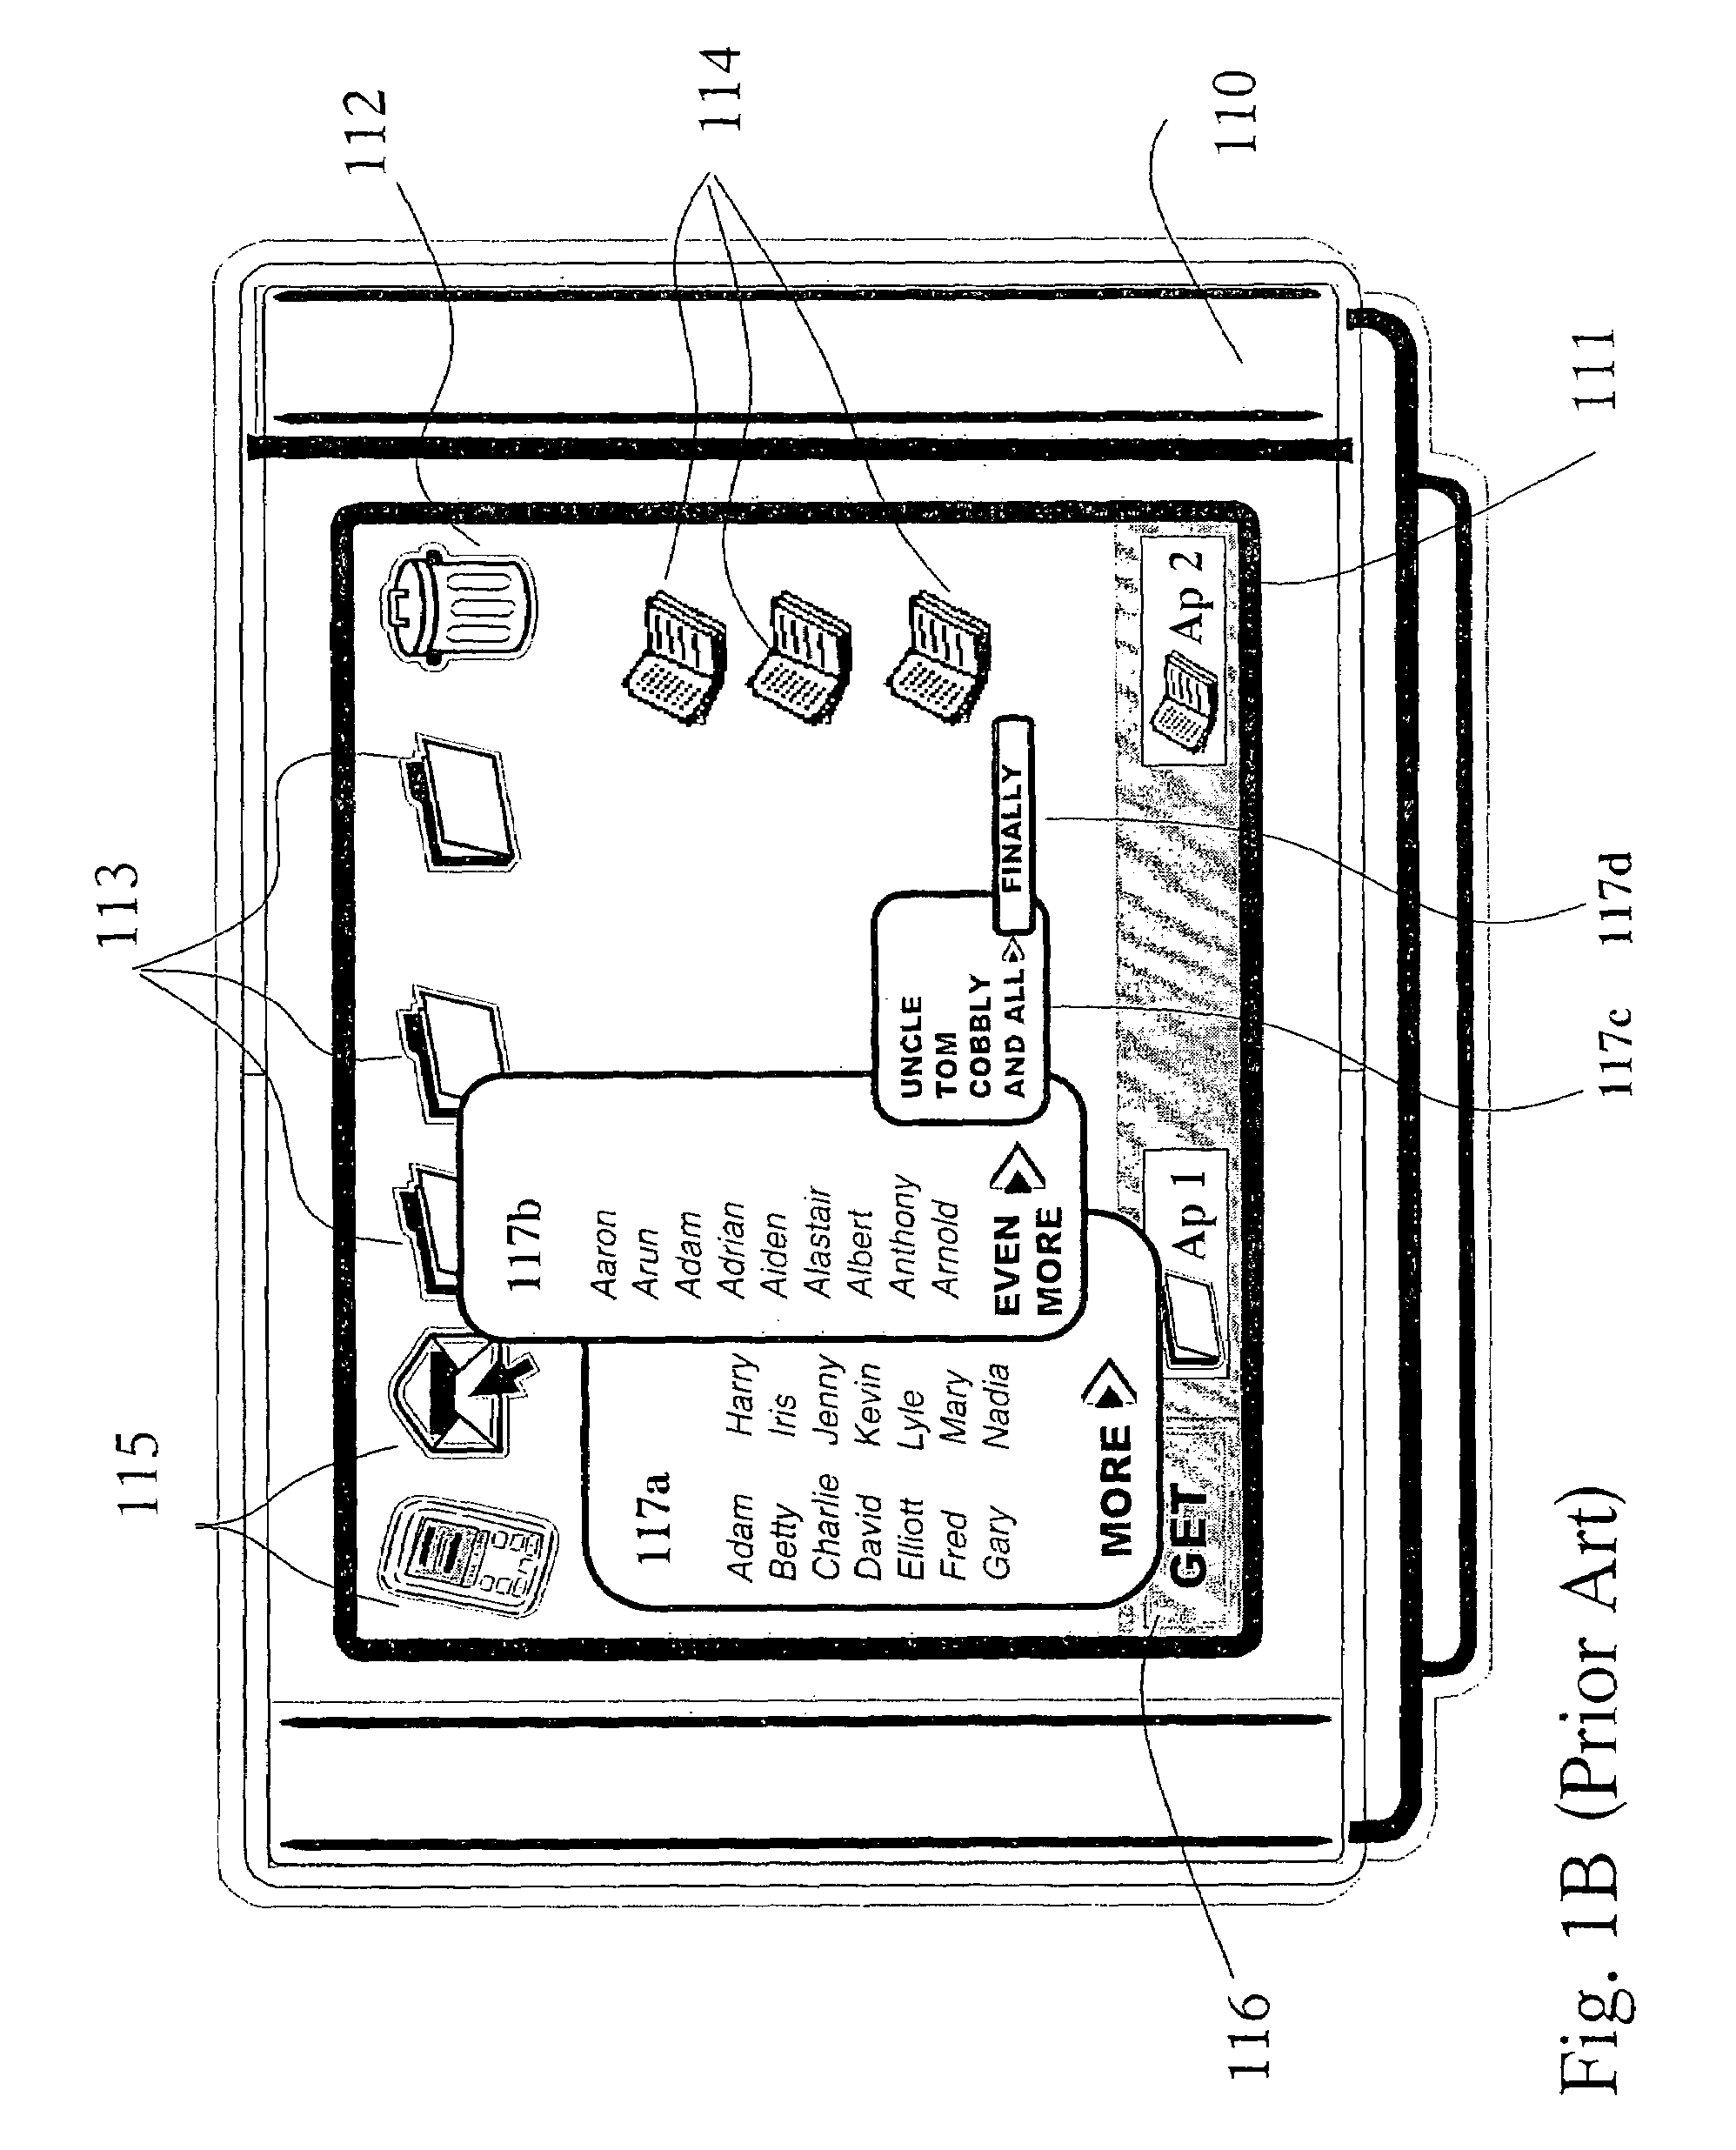 Three dimensional graphical user interface representative of a physical work space